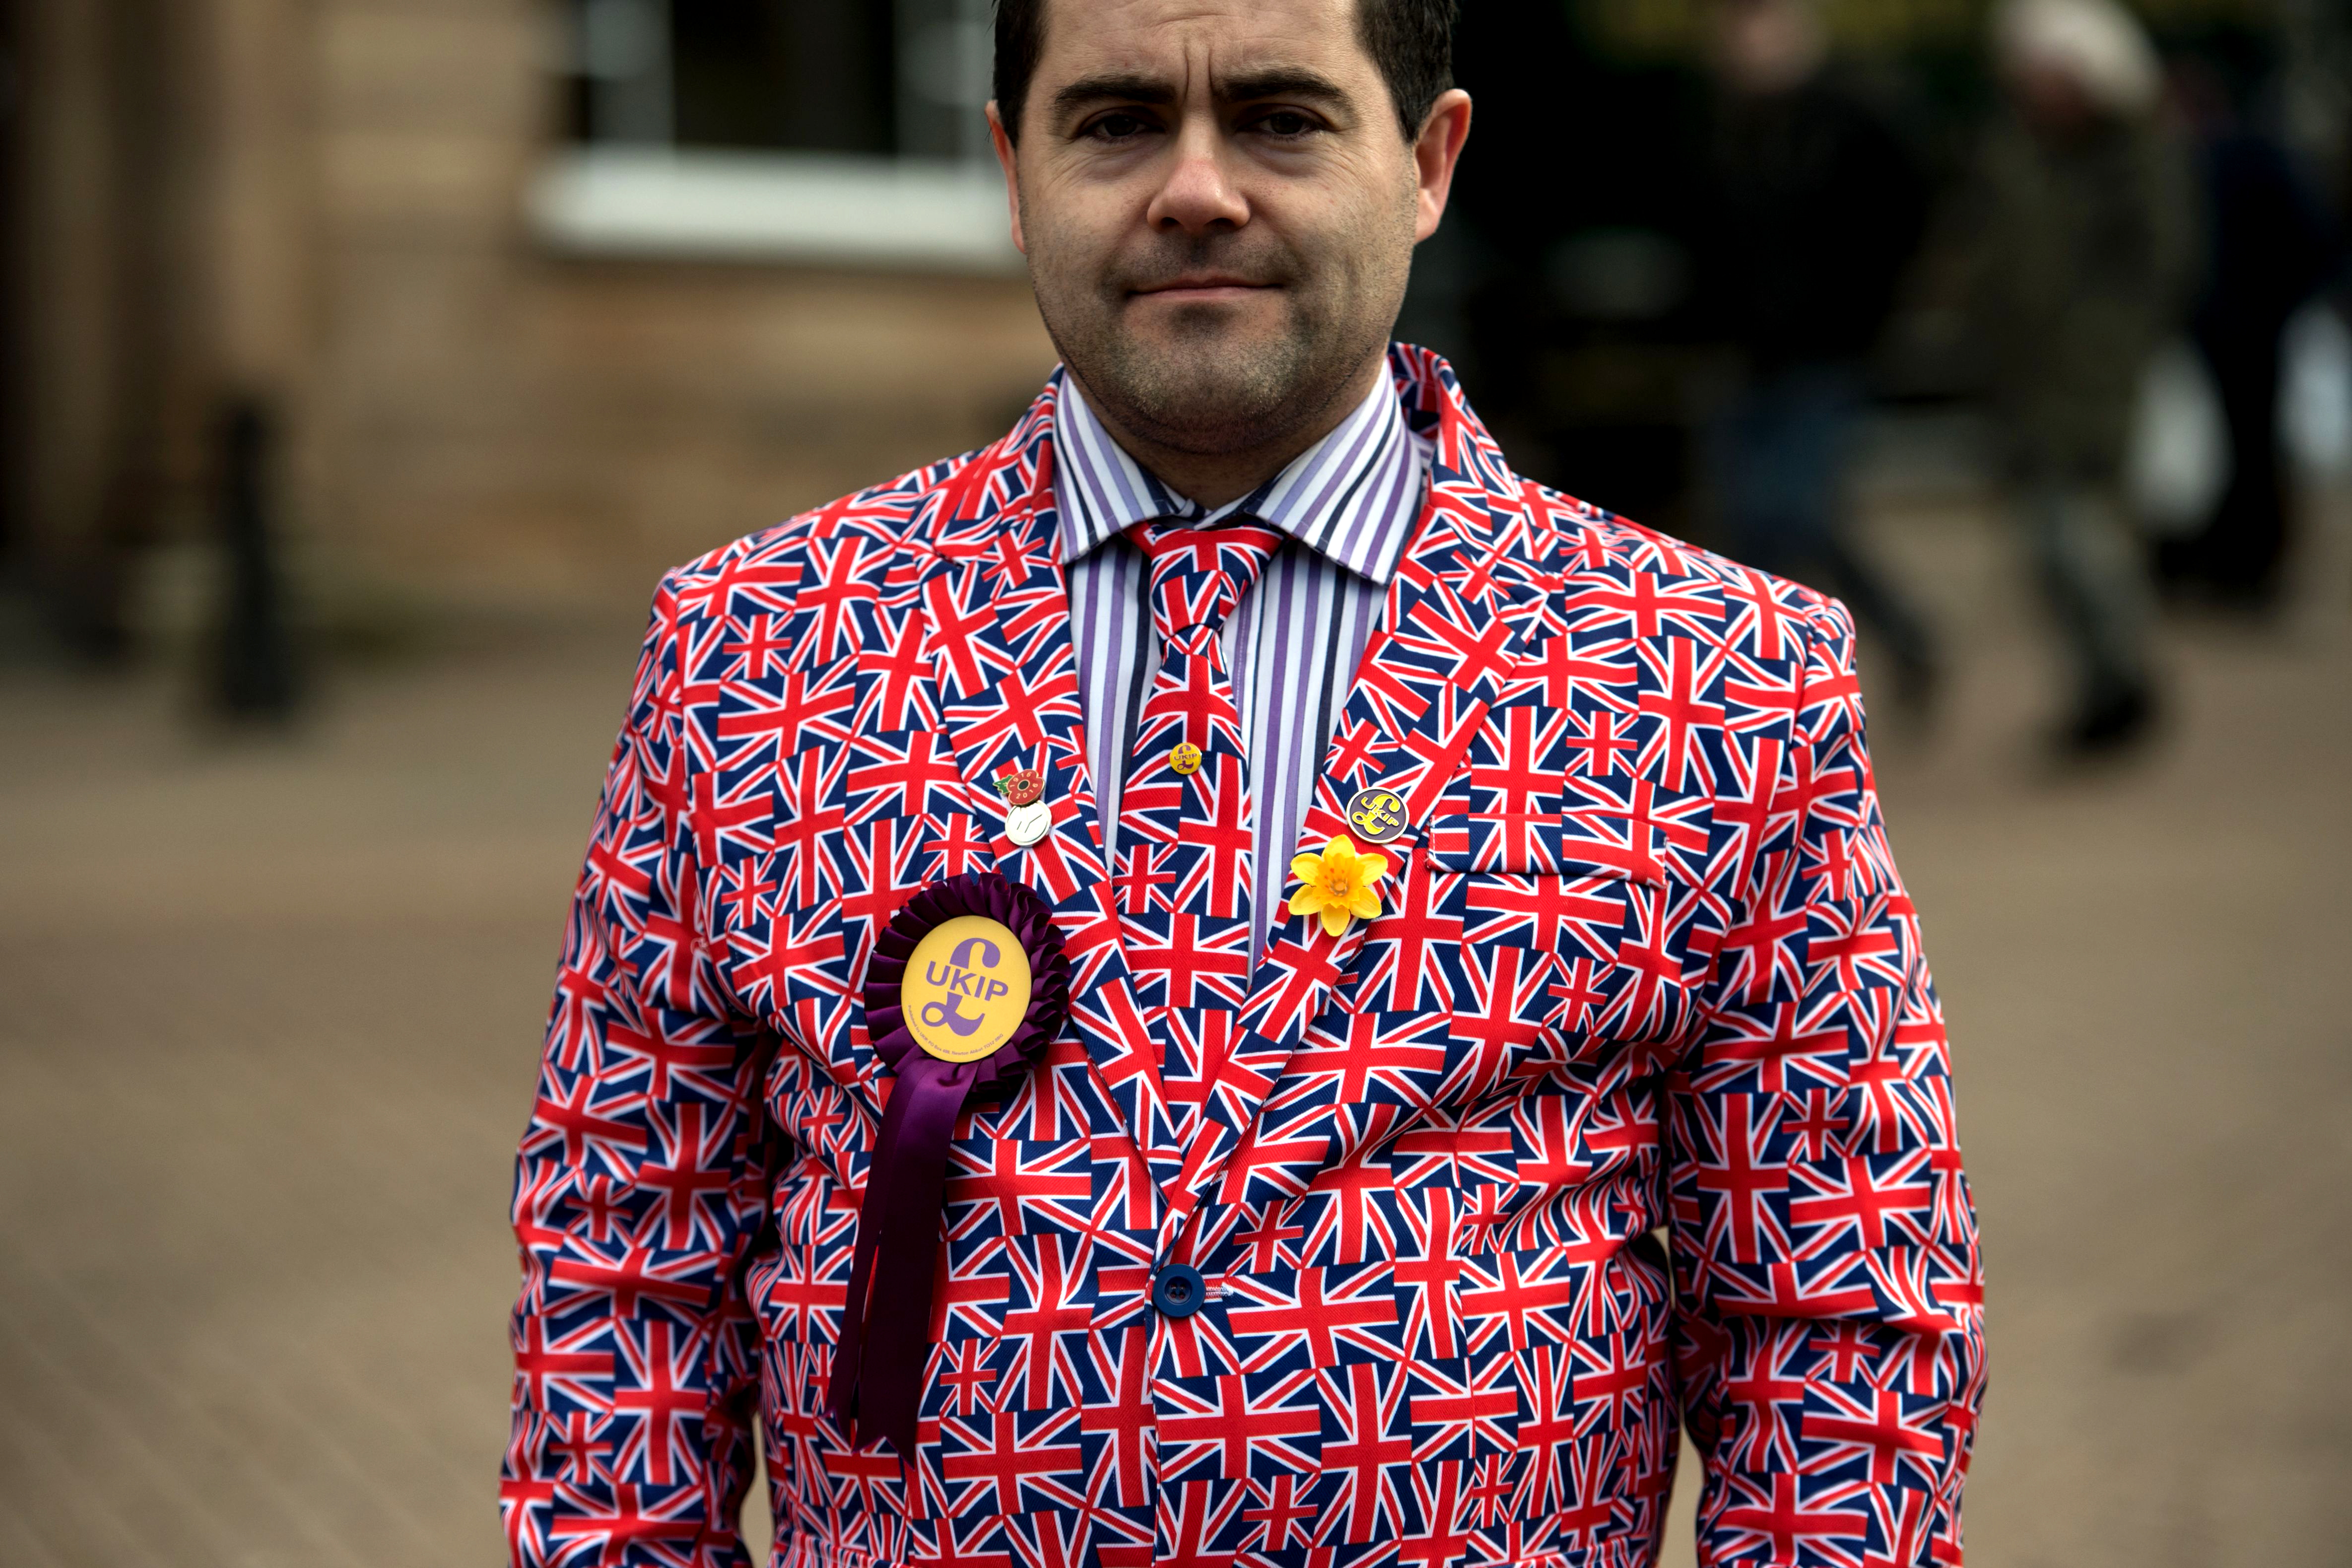 A member of the UK Independence Party.